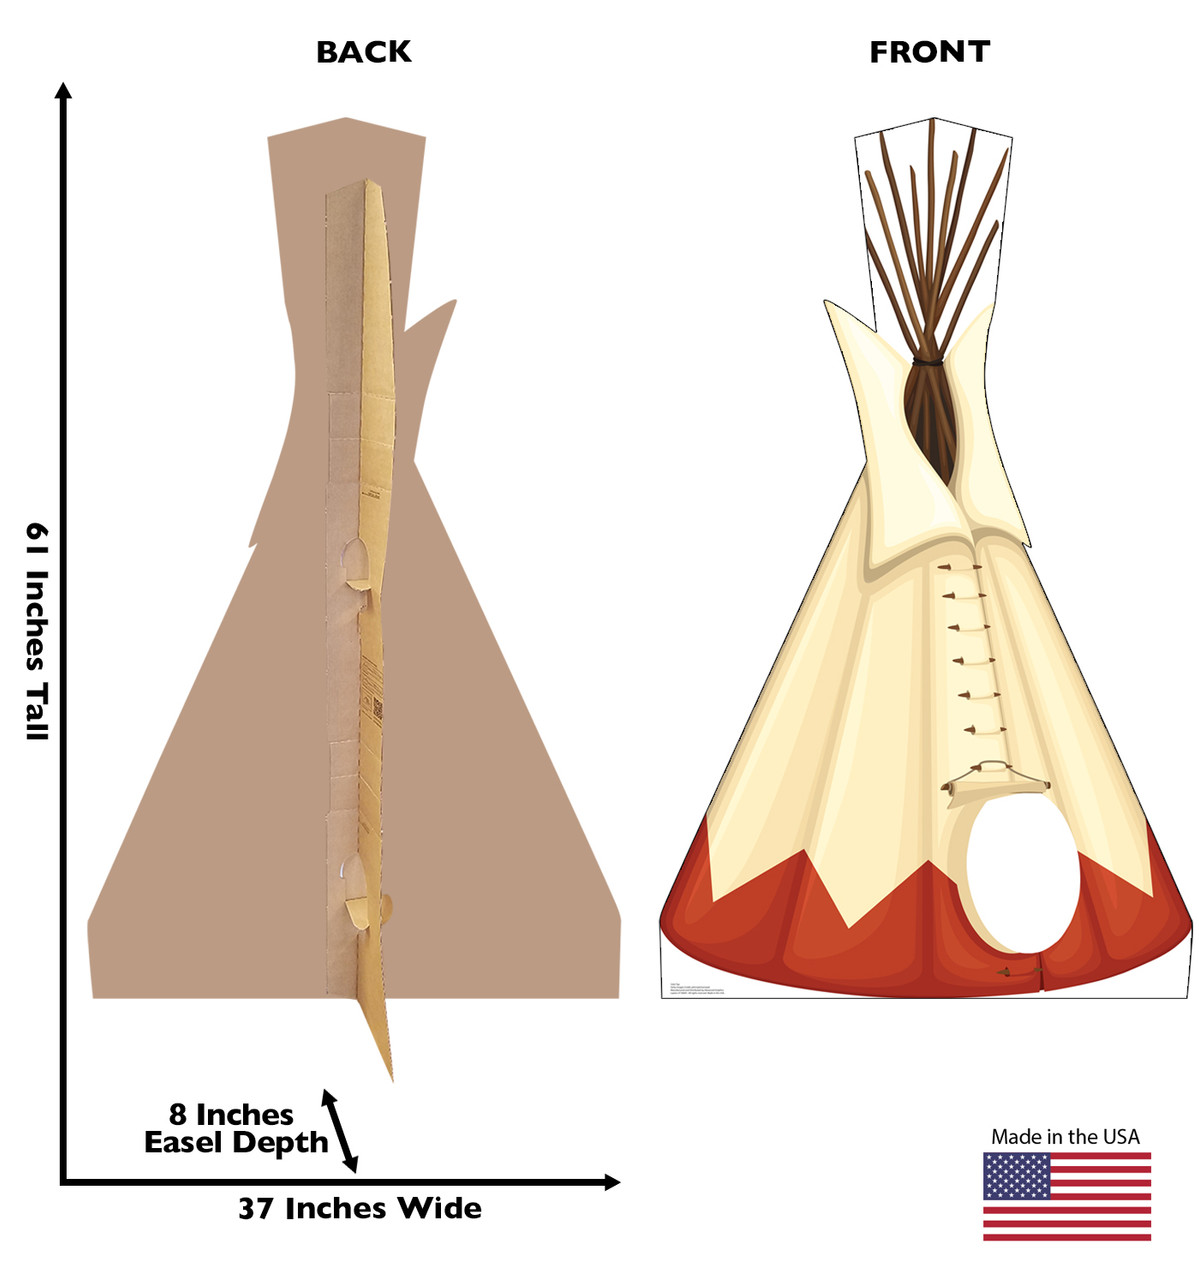 Life-size cardboard standee of a Tipi with back and front dimensions.